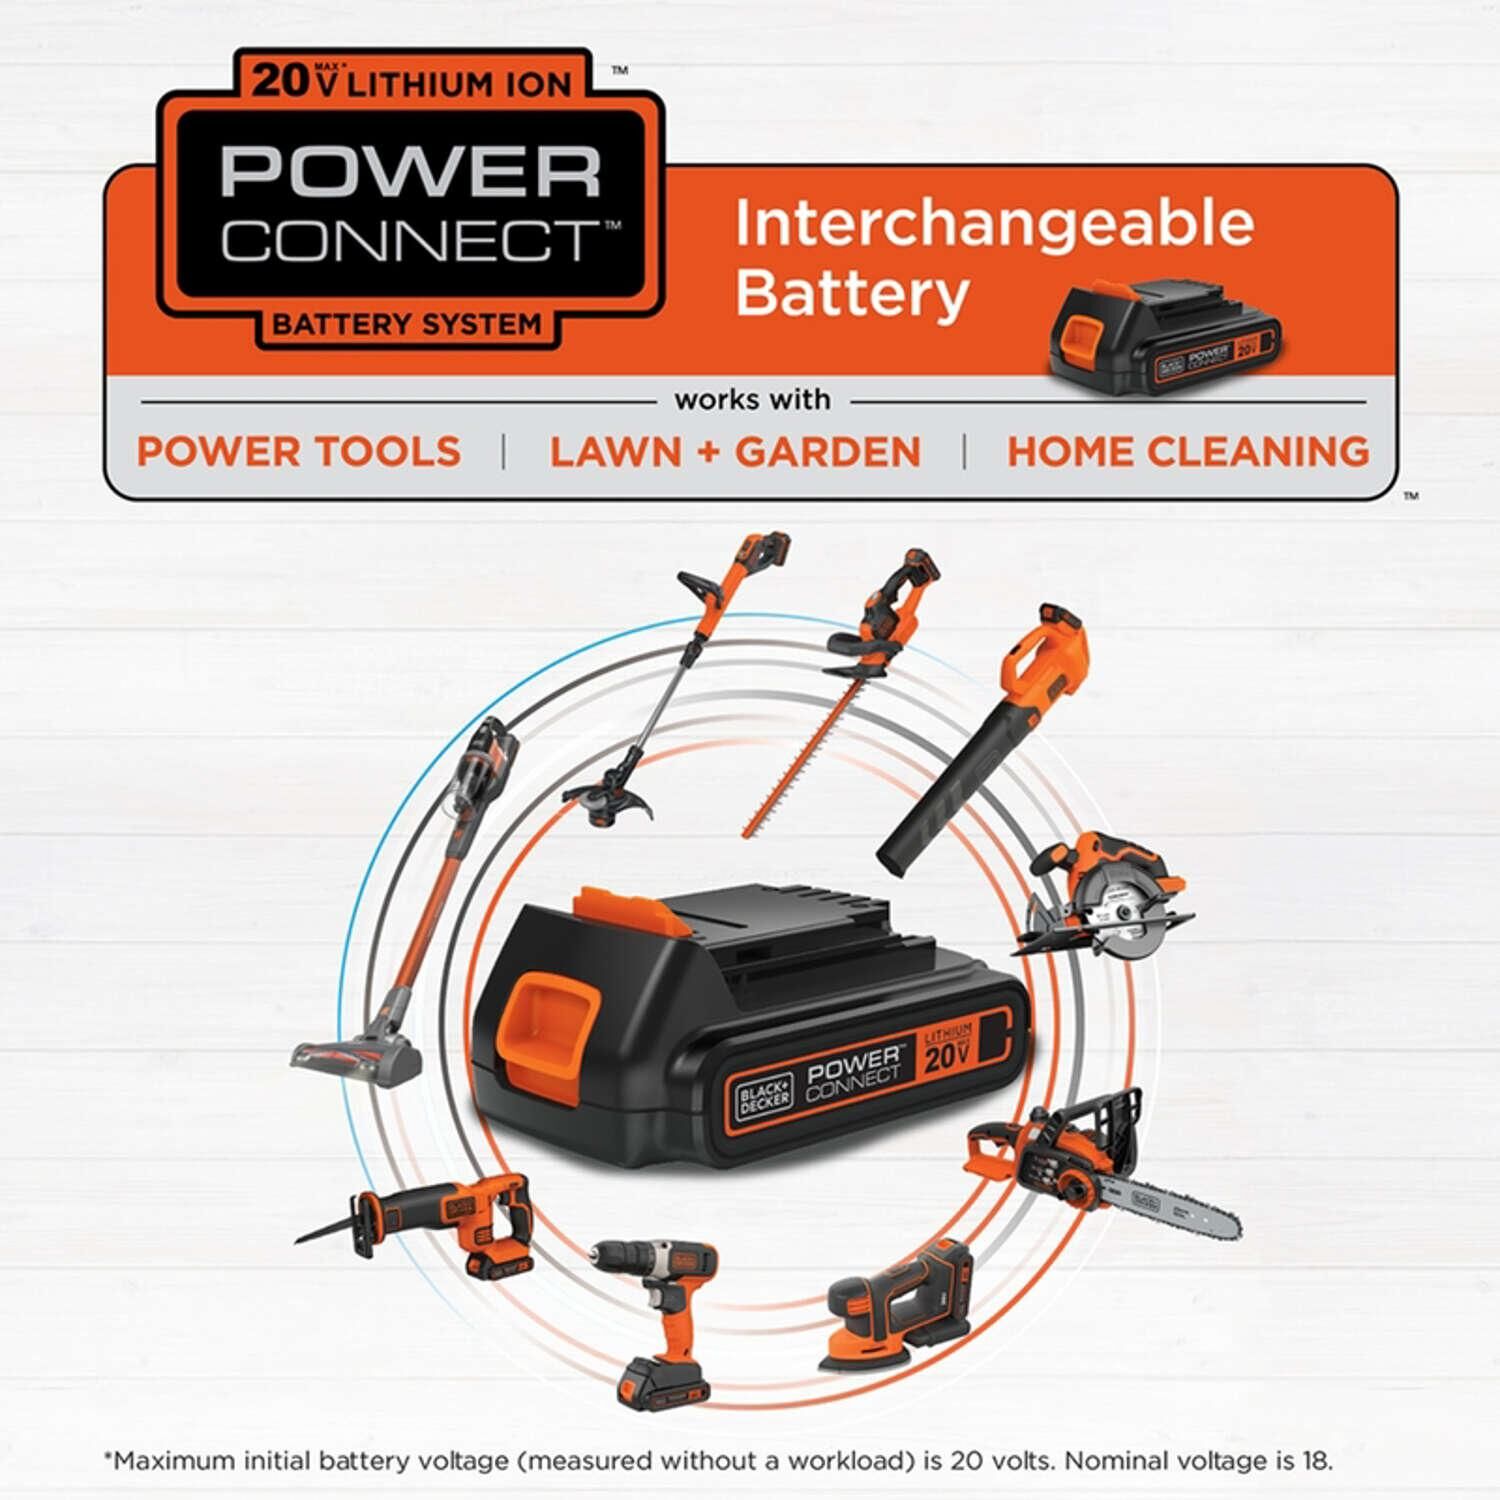 Black and decker 20 volt max lithium ion power connect battery system